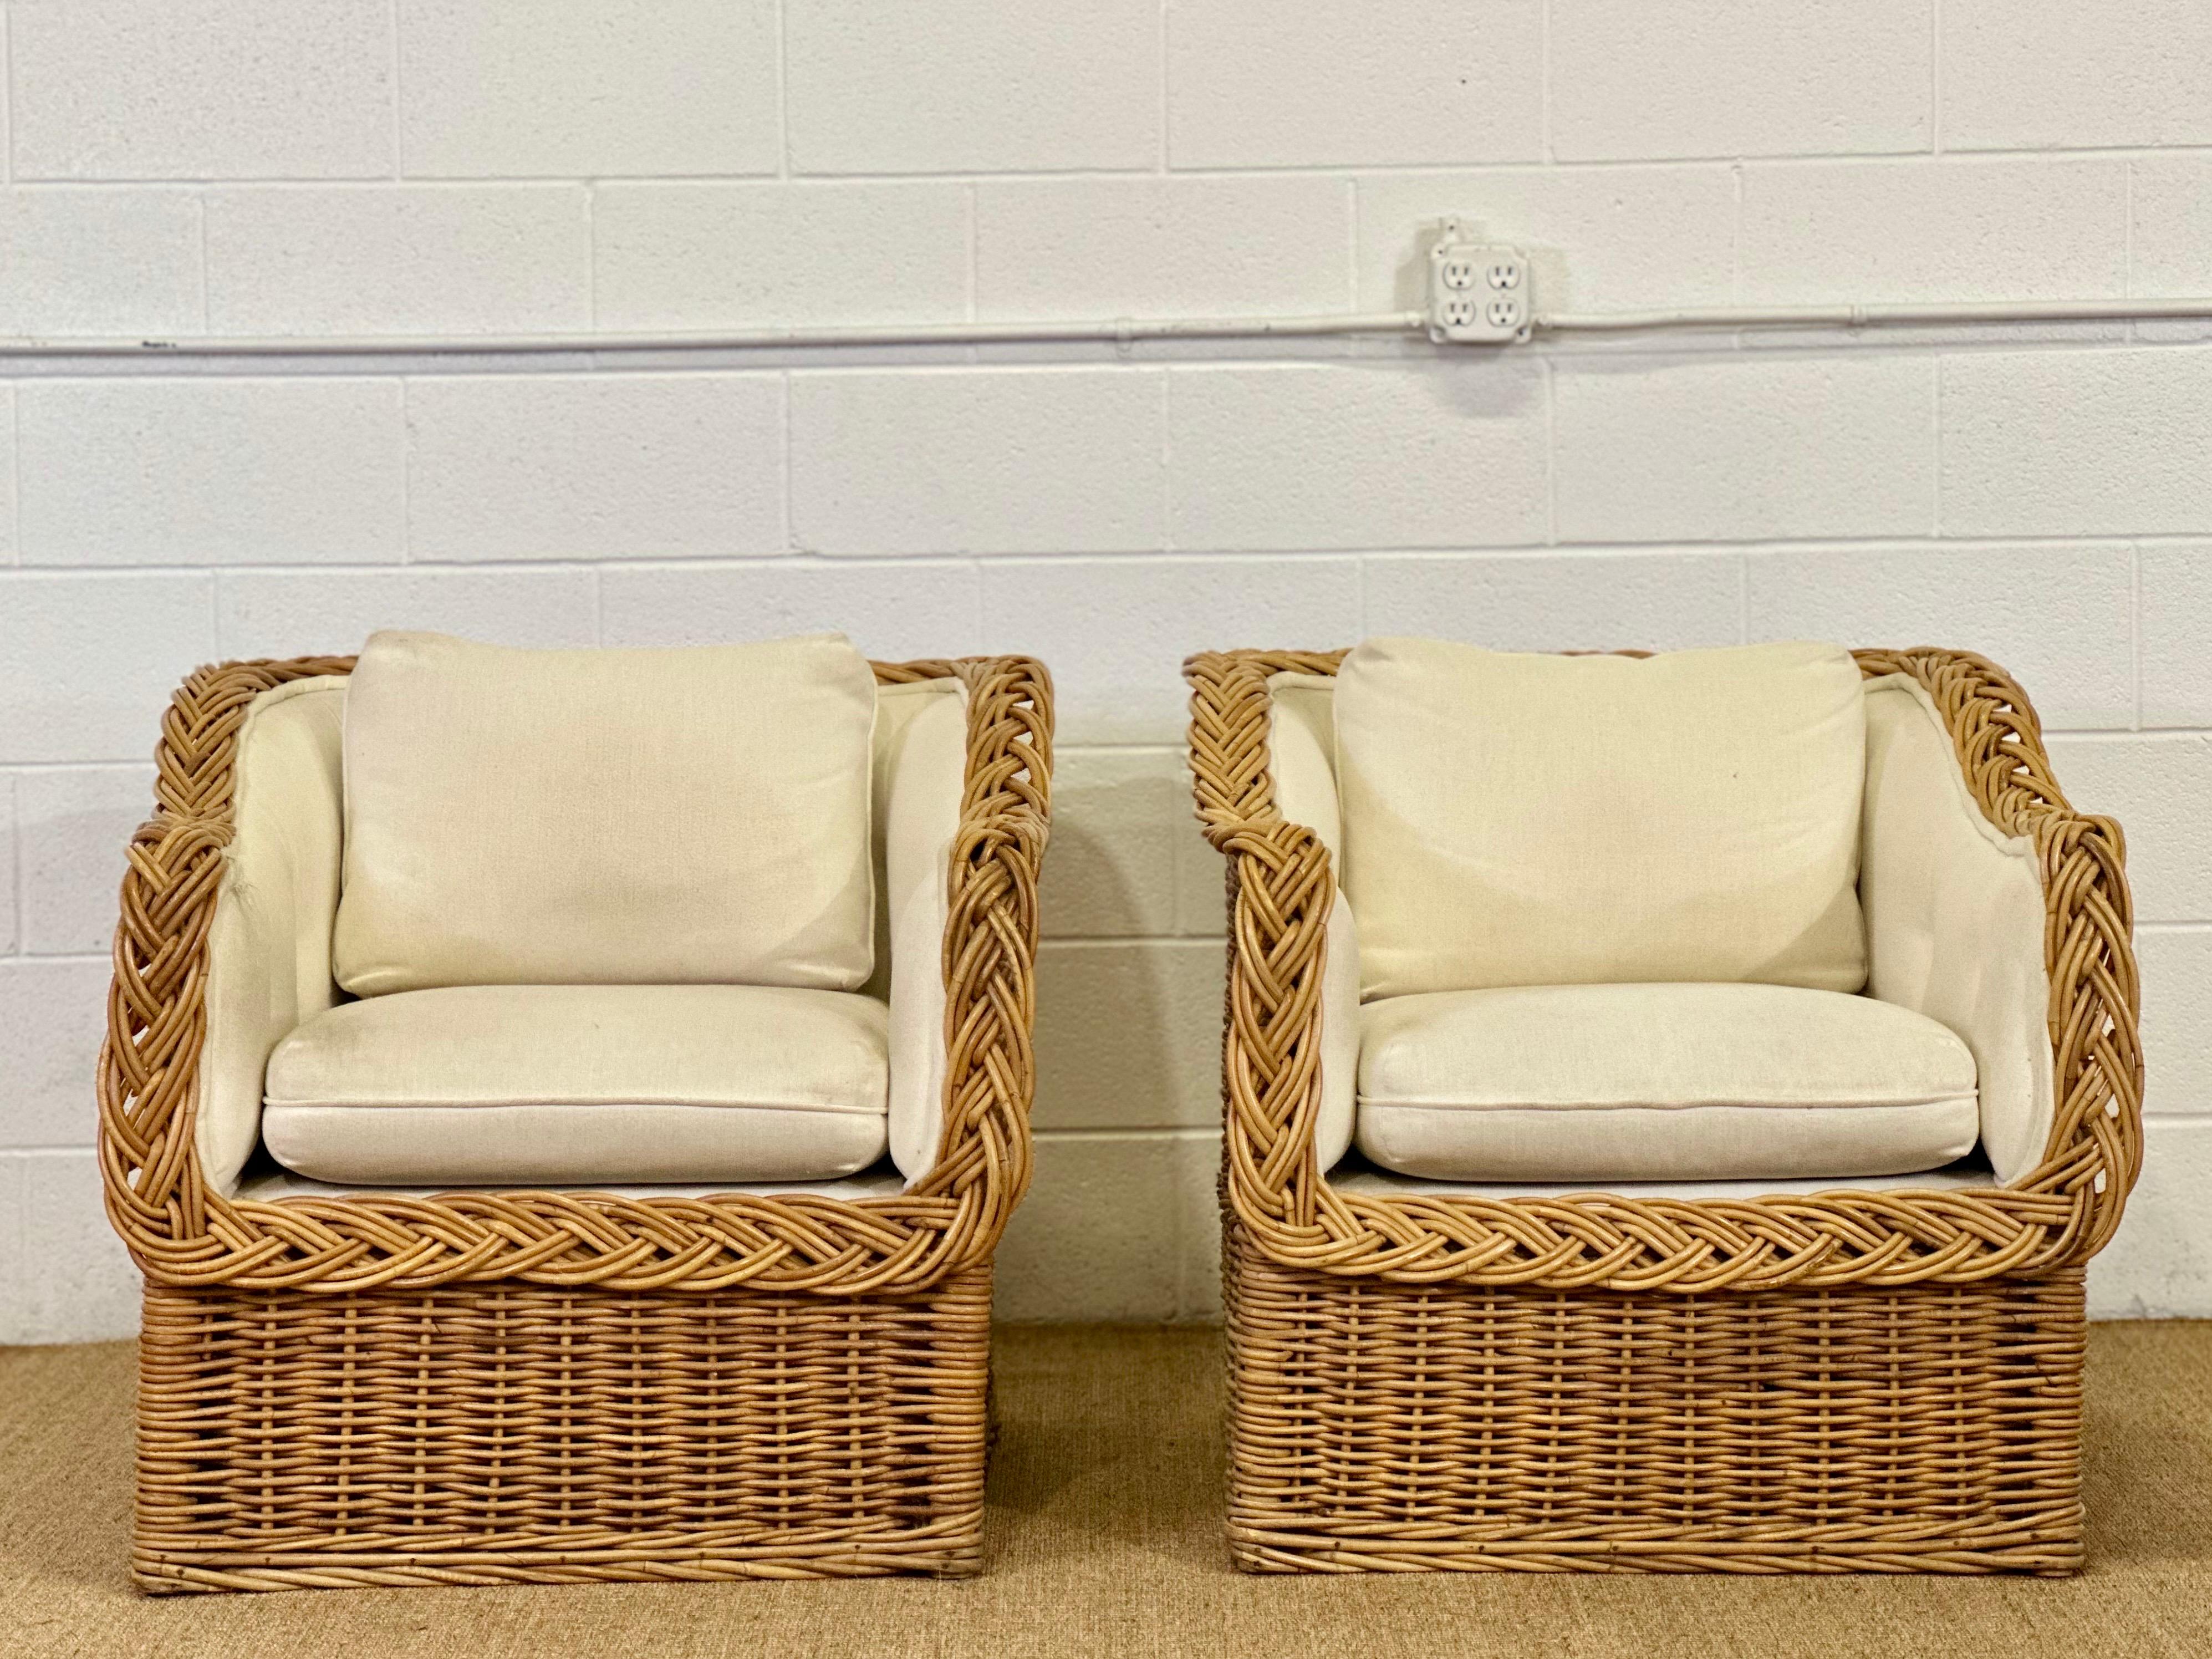 Italian Wicker Works Rattan Living Room Set - 4 Pieces  For Sale 3